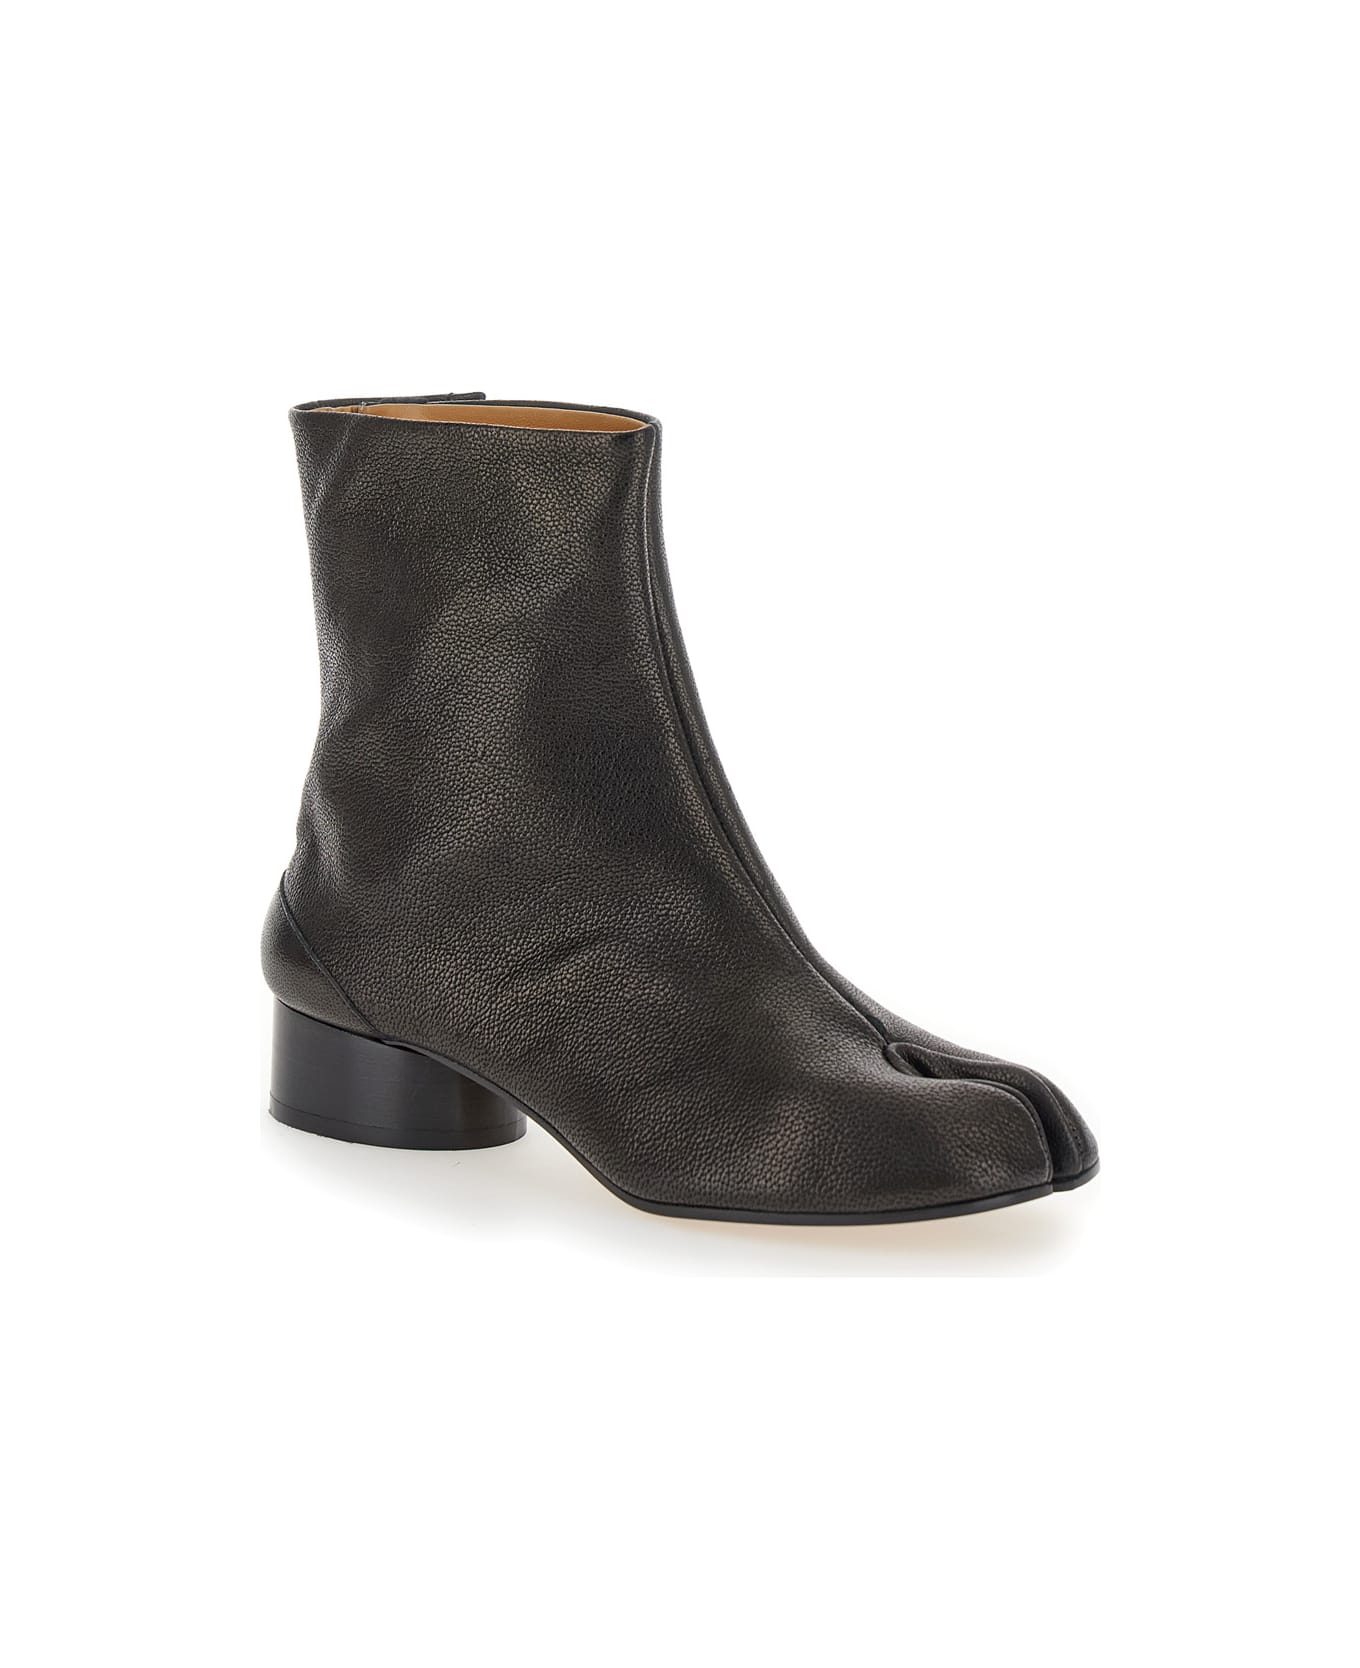 Maison Margiela 'tabi' Black Ankle Boots In Leather Woman - Black ブーツ